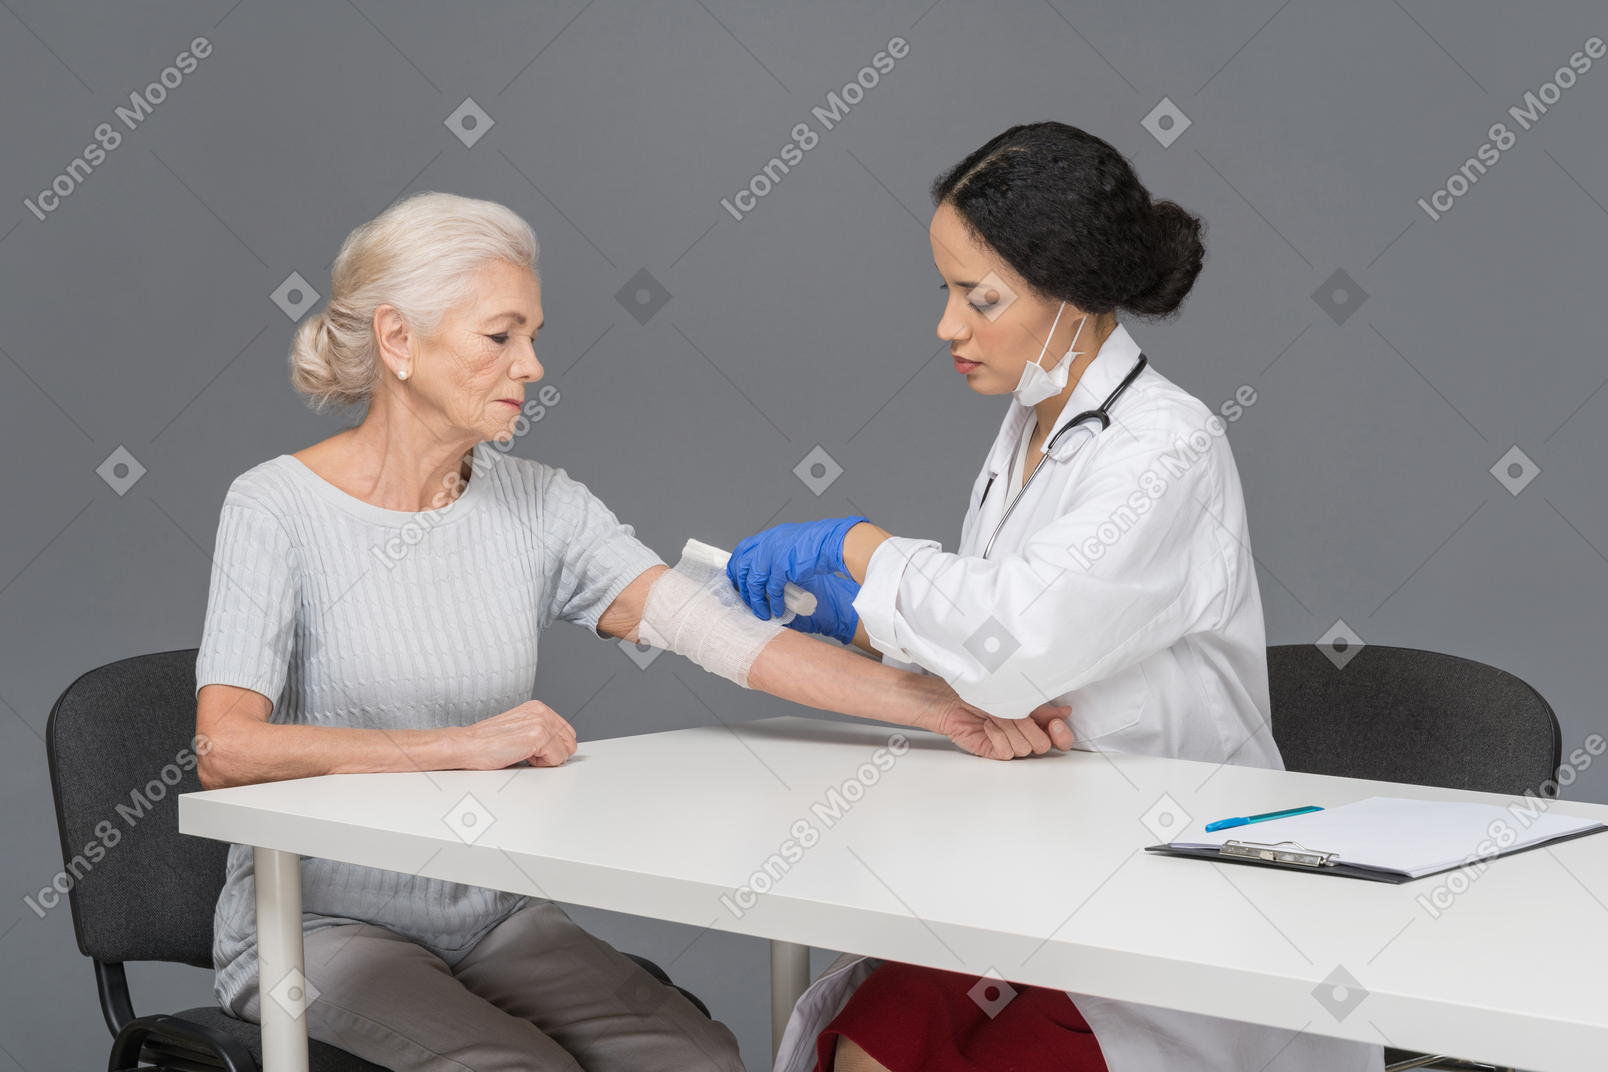 Female doctor putting a bandage on patient's elbow